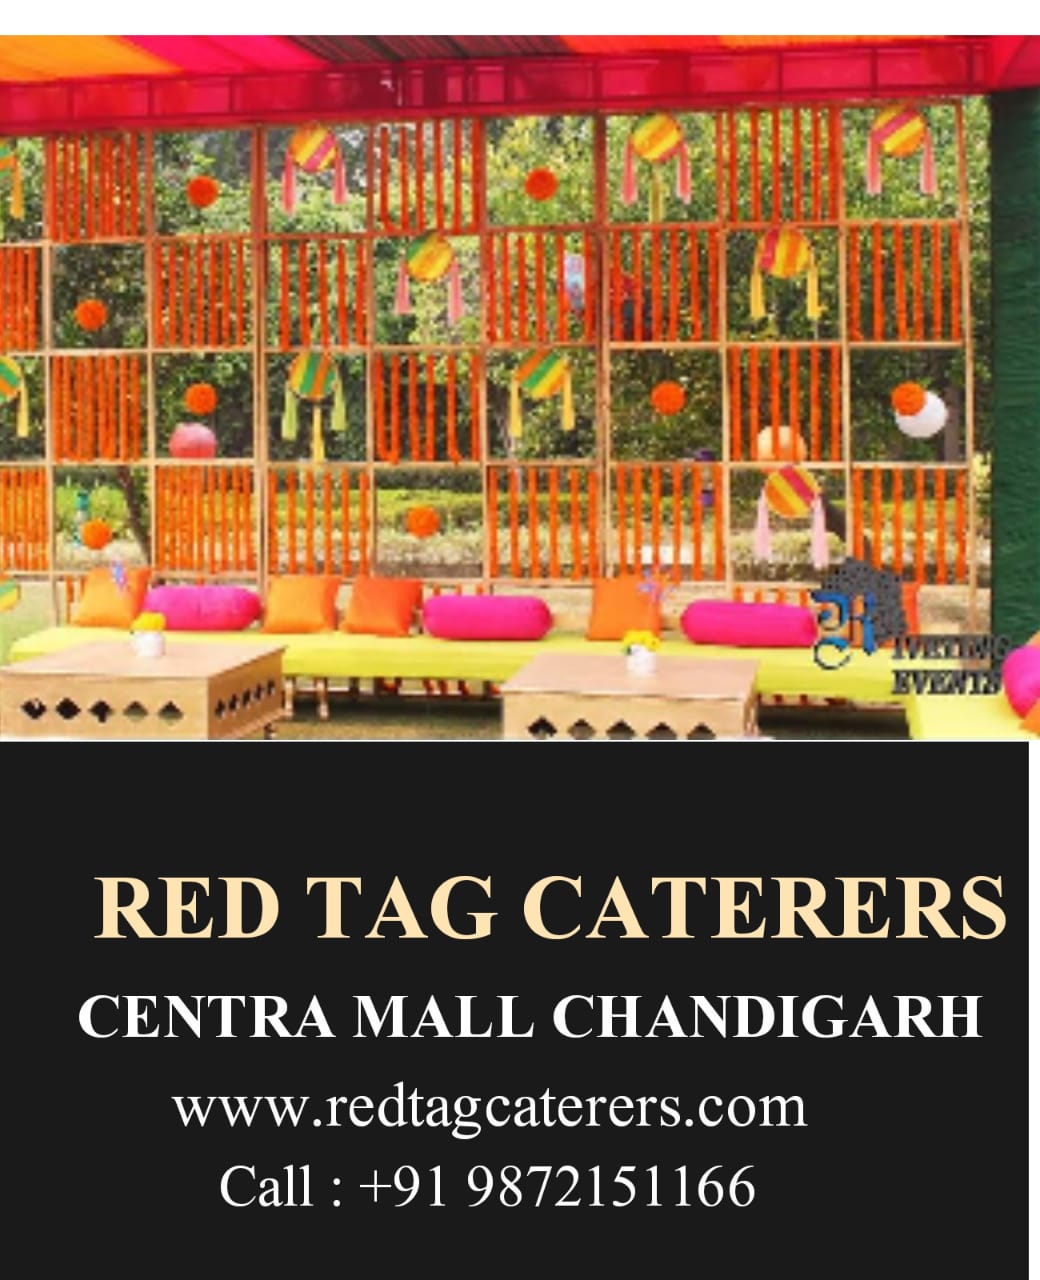 Best professional catering in Chandigarh | Red Tag Caterers | Best professional catering in Chandigarh, best outdoor catering in Chandigarh, best luxury catering in Chandigarh. - GL48354